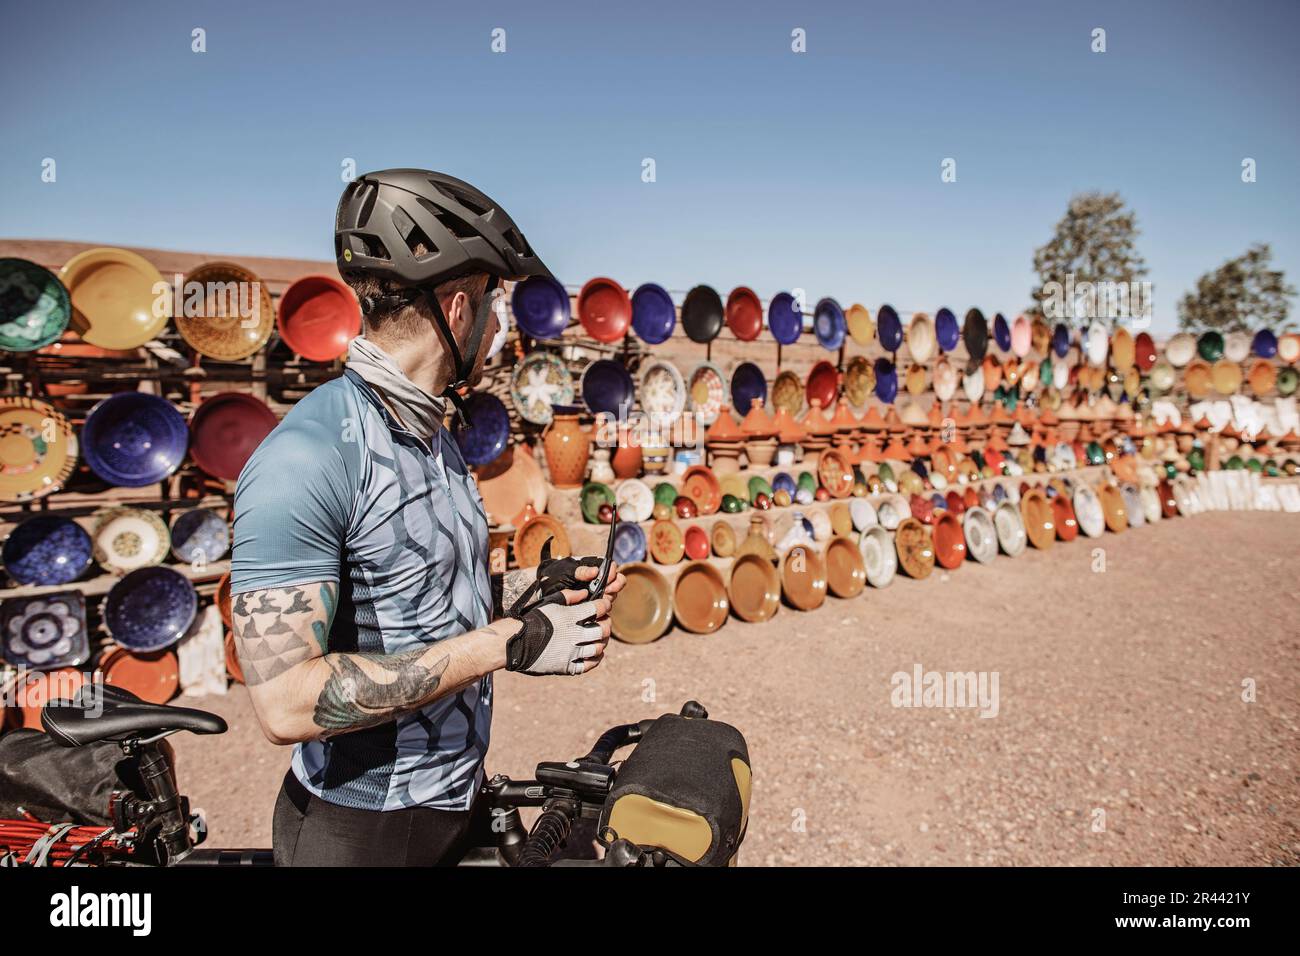 A male cyclist stops next to an outdoor ceramic market, Morocco Stock Photo